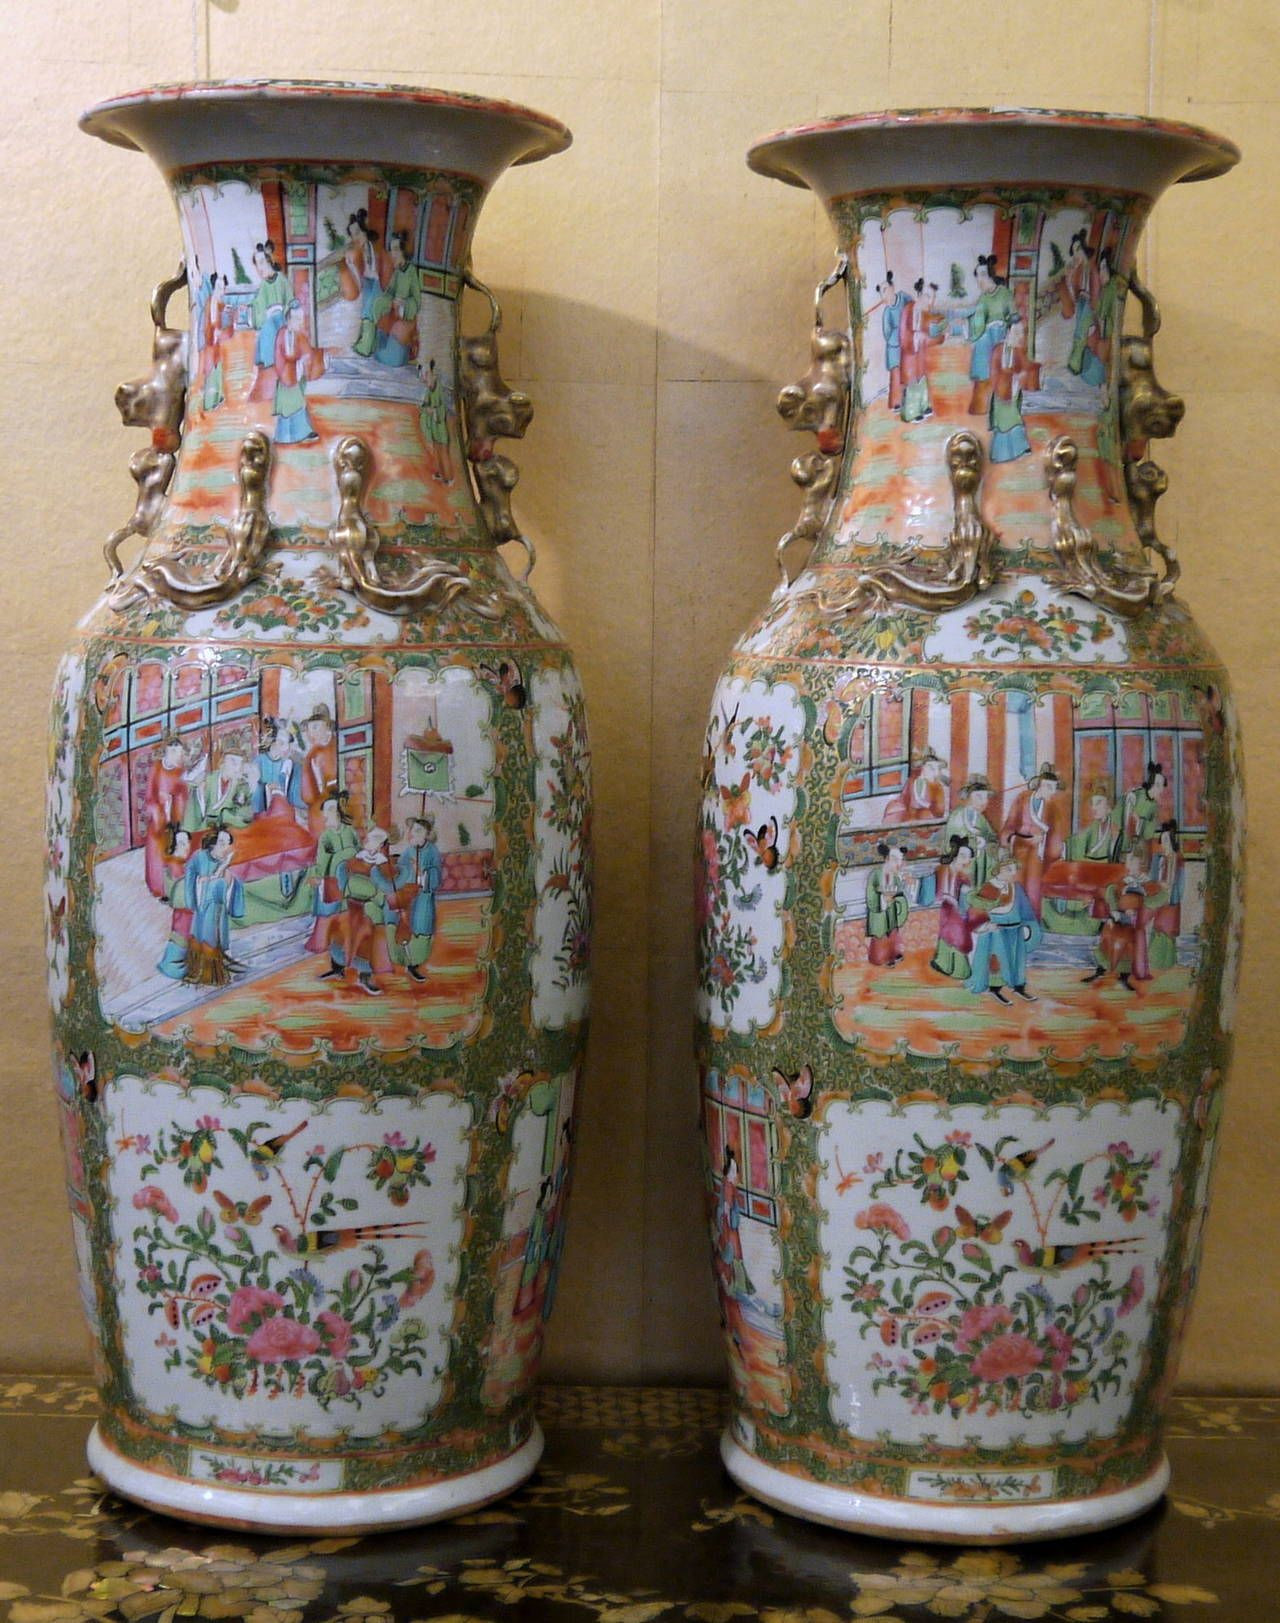 20 Fabulous Chinese Porcelain Vases for Sale 2023 free download chinese porcelain vases for sale of pair of large chinese rose canton vases in 2018 artwork for pair of large chinese rose canton vases 2